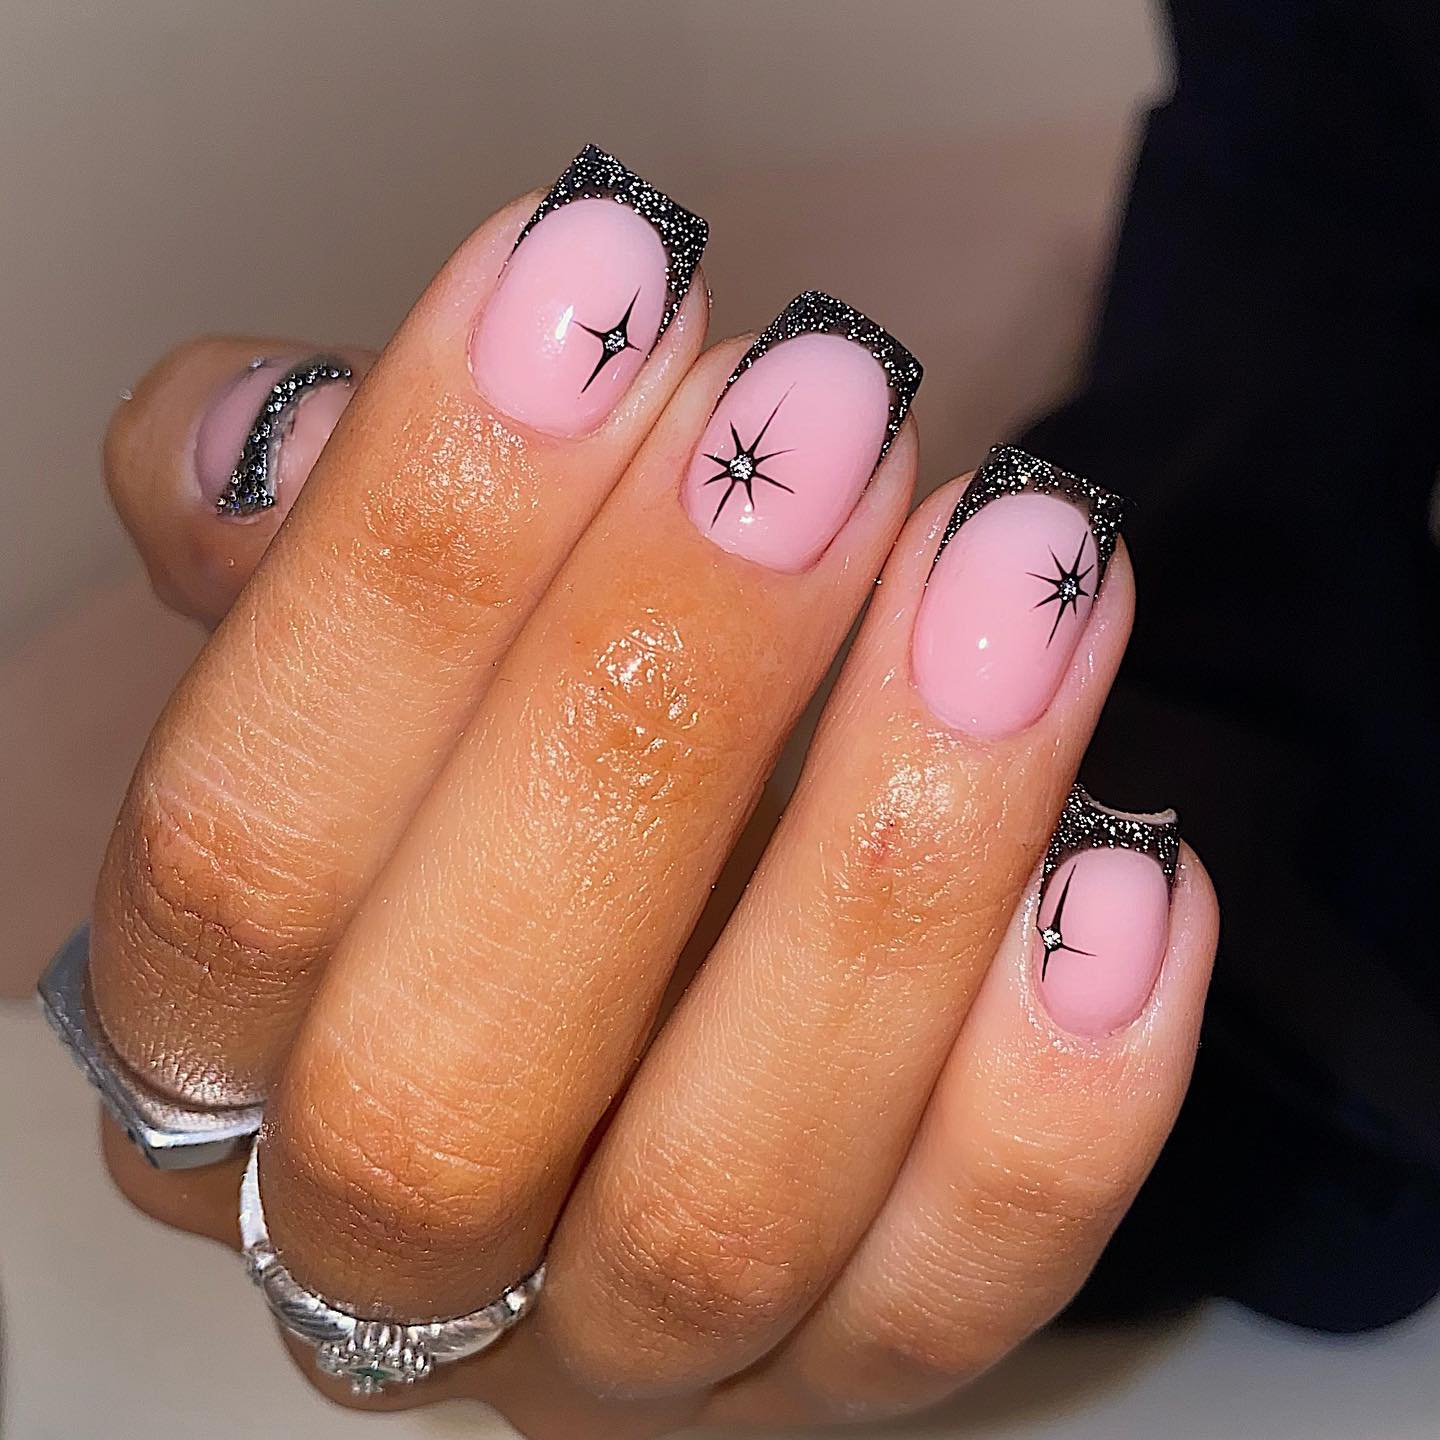 Black Glitter French Tip Nails with star design